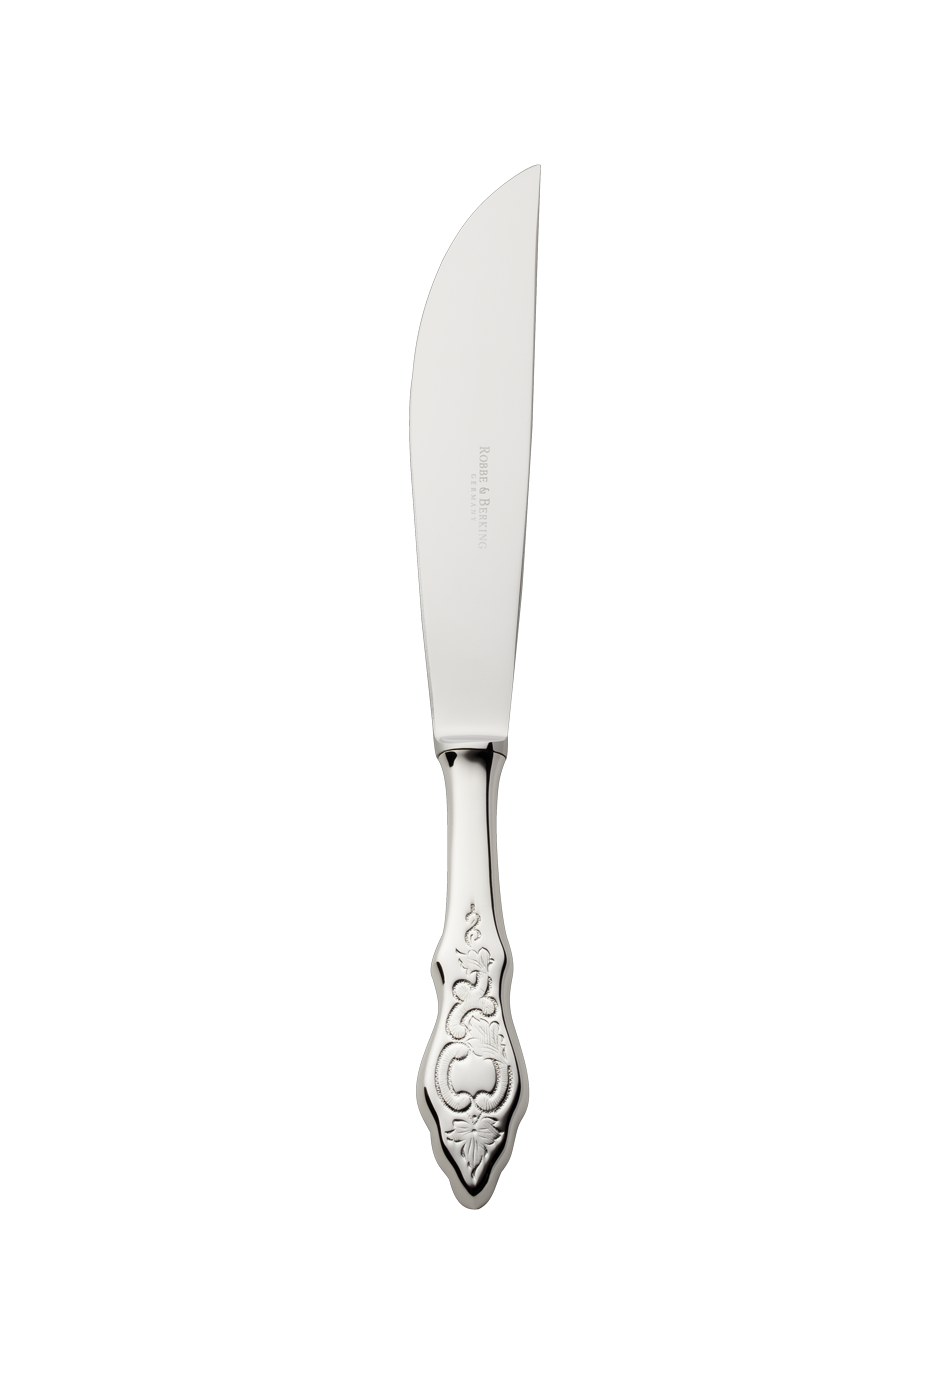 Ostfriesen Carving Knife (18/8 stainless steel)